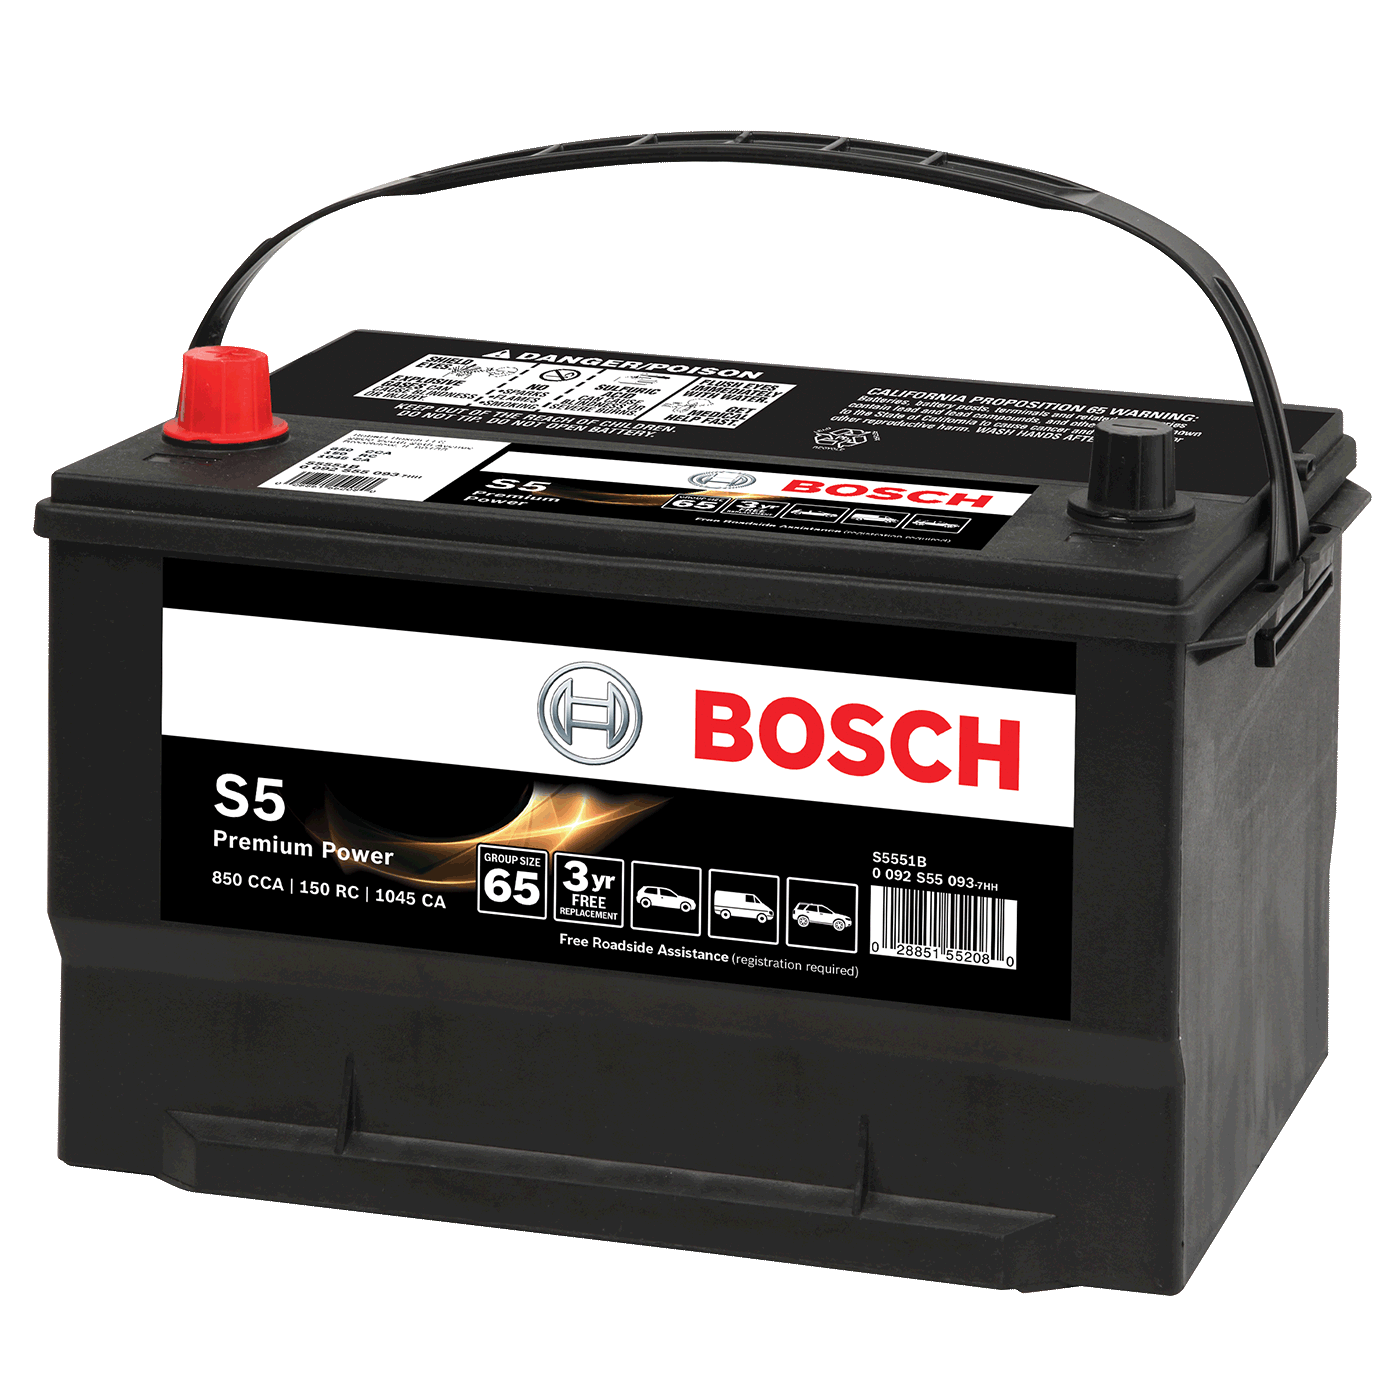 Car Batteries, Lithium Ion Batteries, Pacific Car, Electrochemical Cell